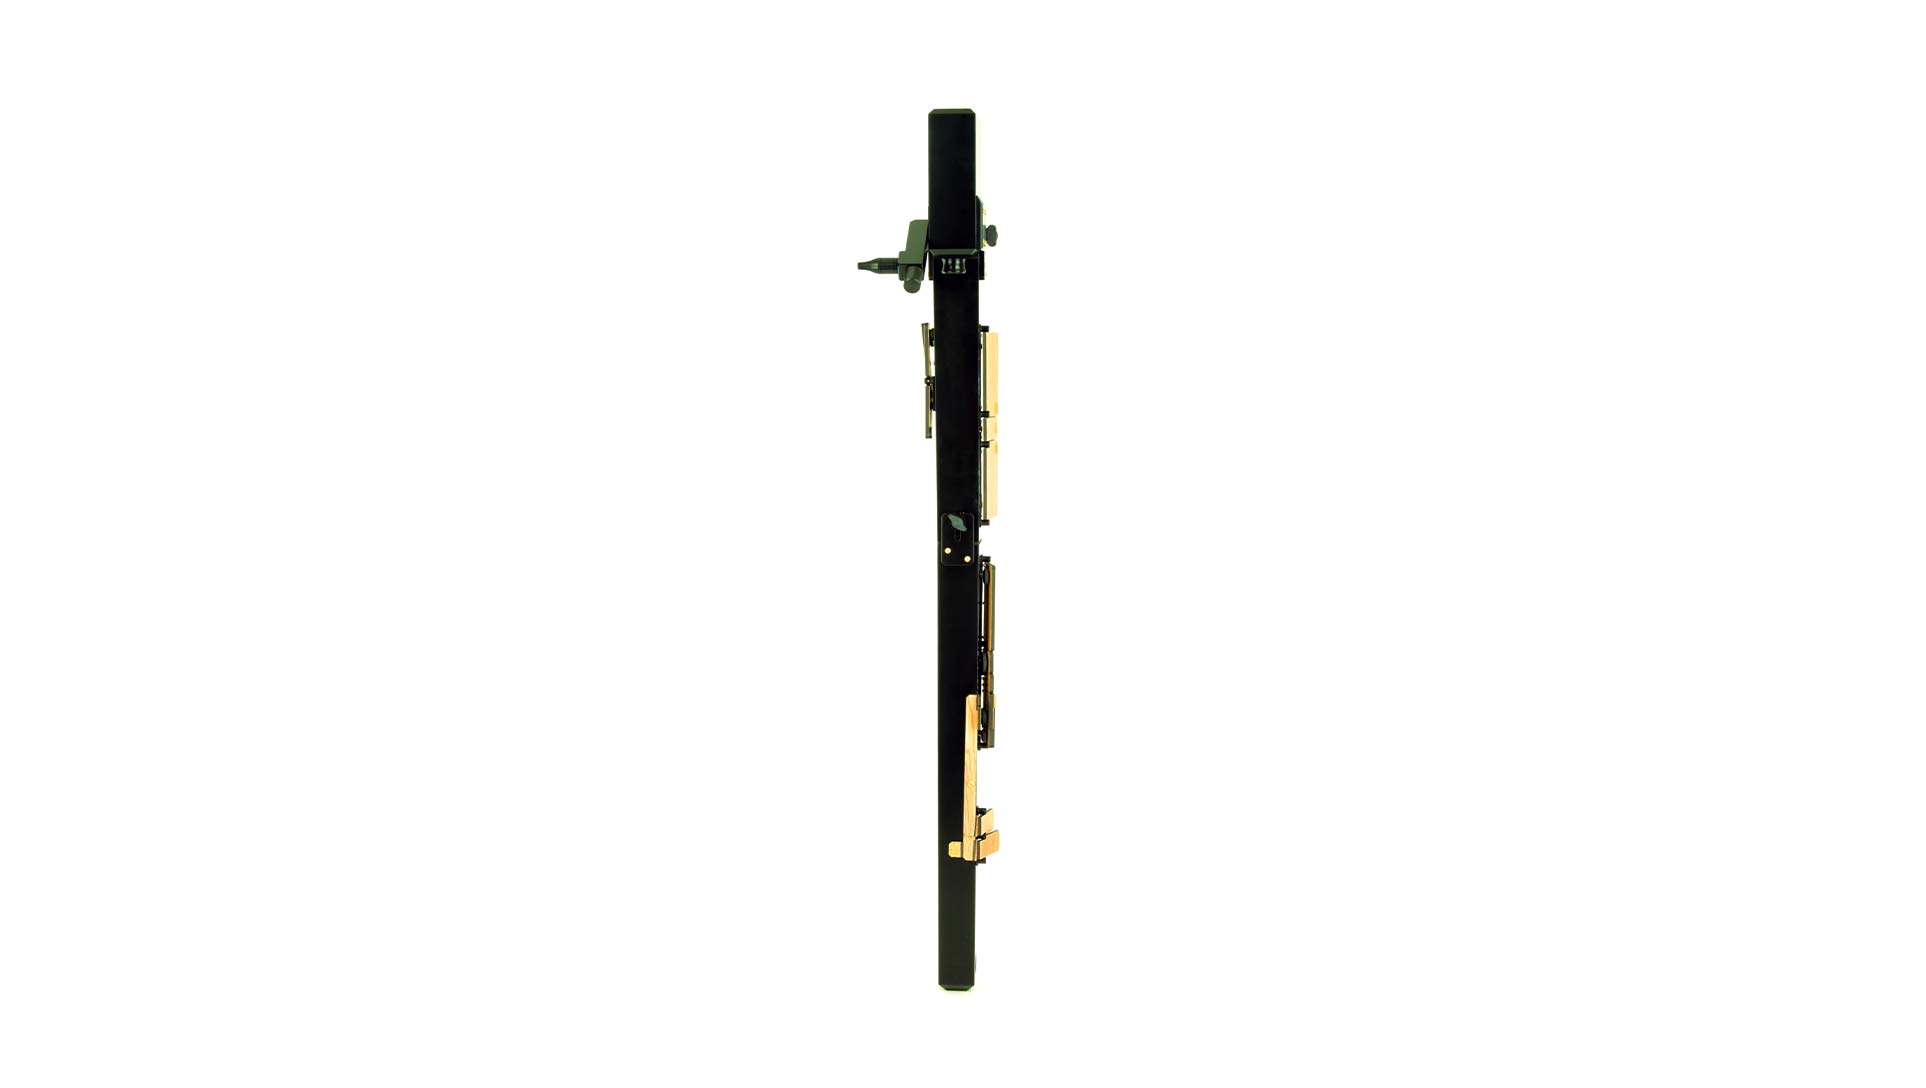 Paetzold by Kunath, "Solo", "HP Original" great bass recorder in c, 442 Hz, RESONA synthetic materia